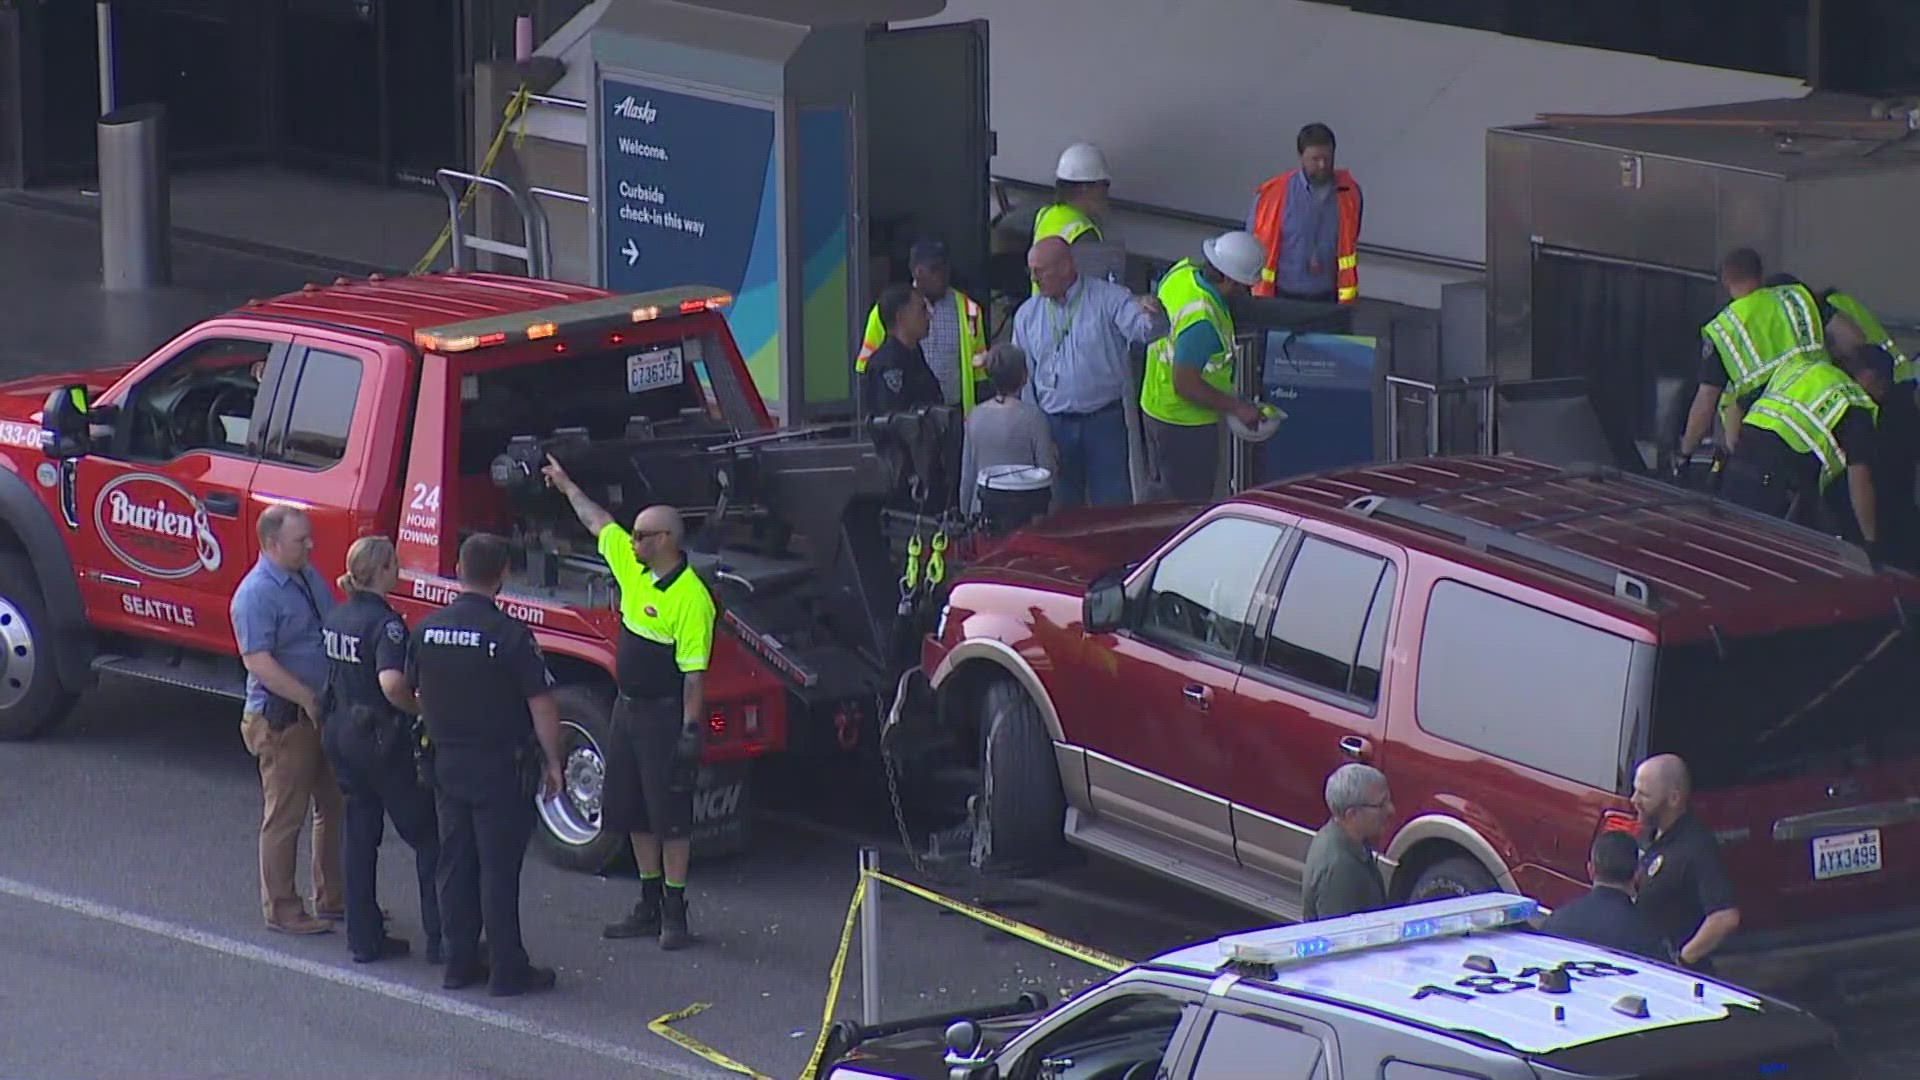 Three people were injured after a car crash in the departures area at Seattle-Tacoma International Airport Wednesday afternoon.